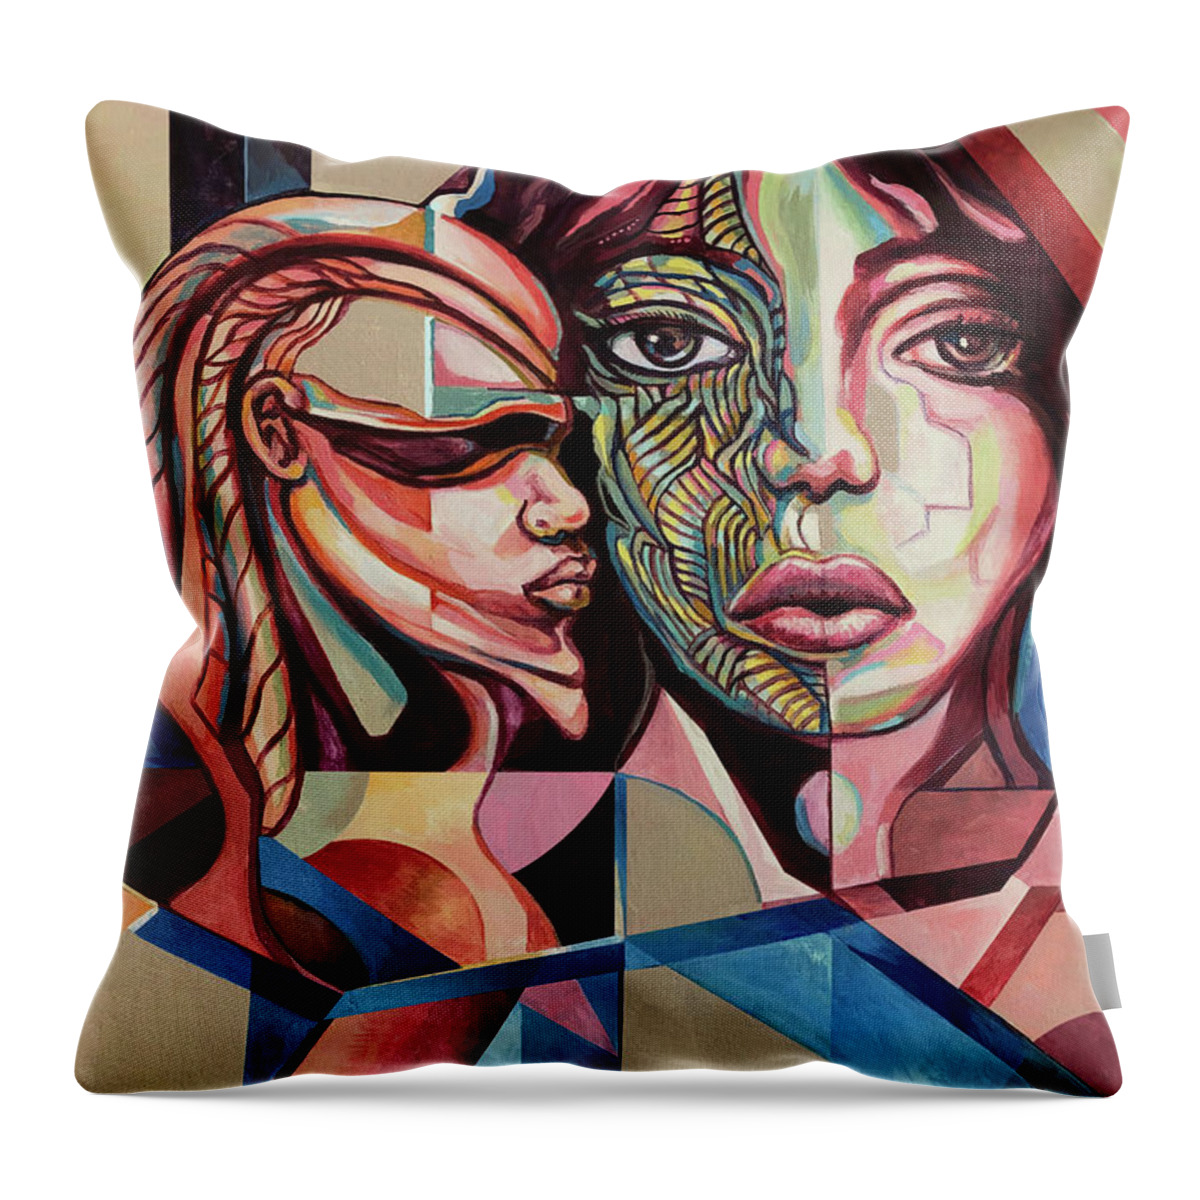 Ancient Tribes: From Original Oil Painting By Lloyd Deberry. Throw Pillow featuring the painting Ancient Tribes #1 by Lloyd DeBerry